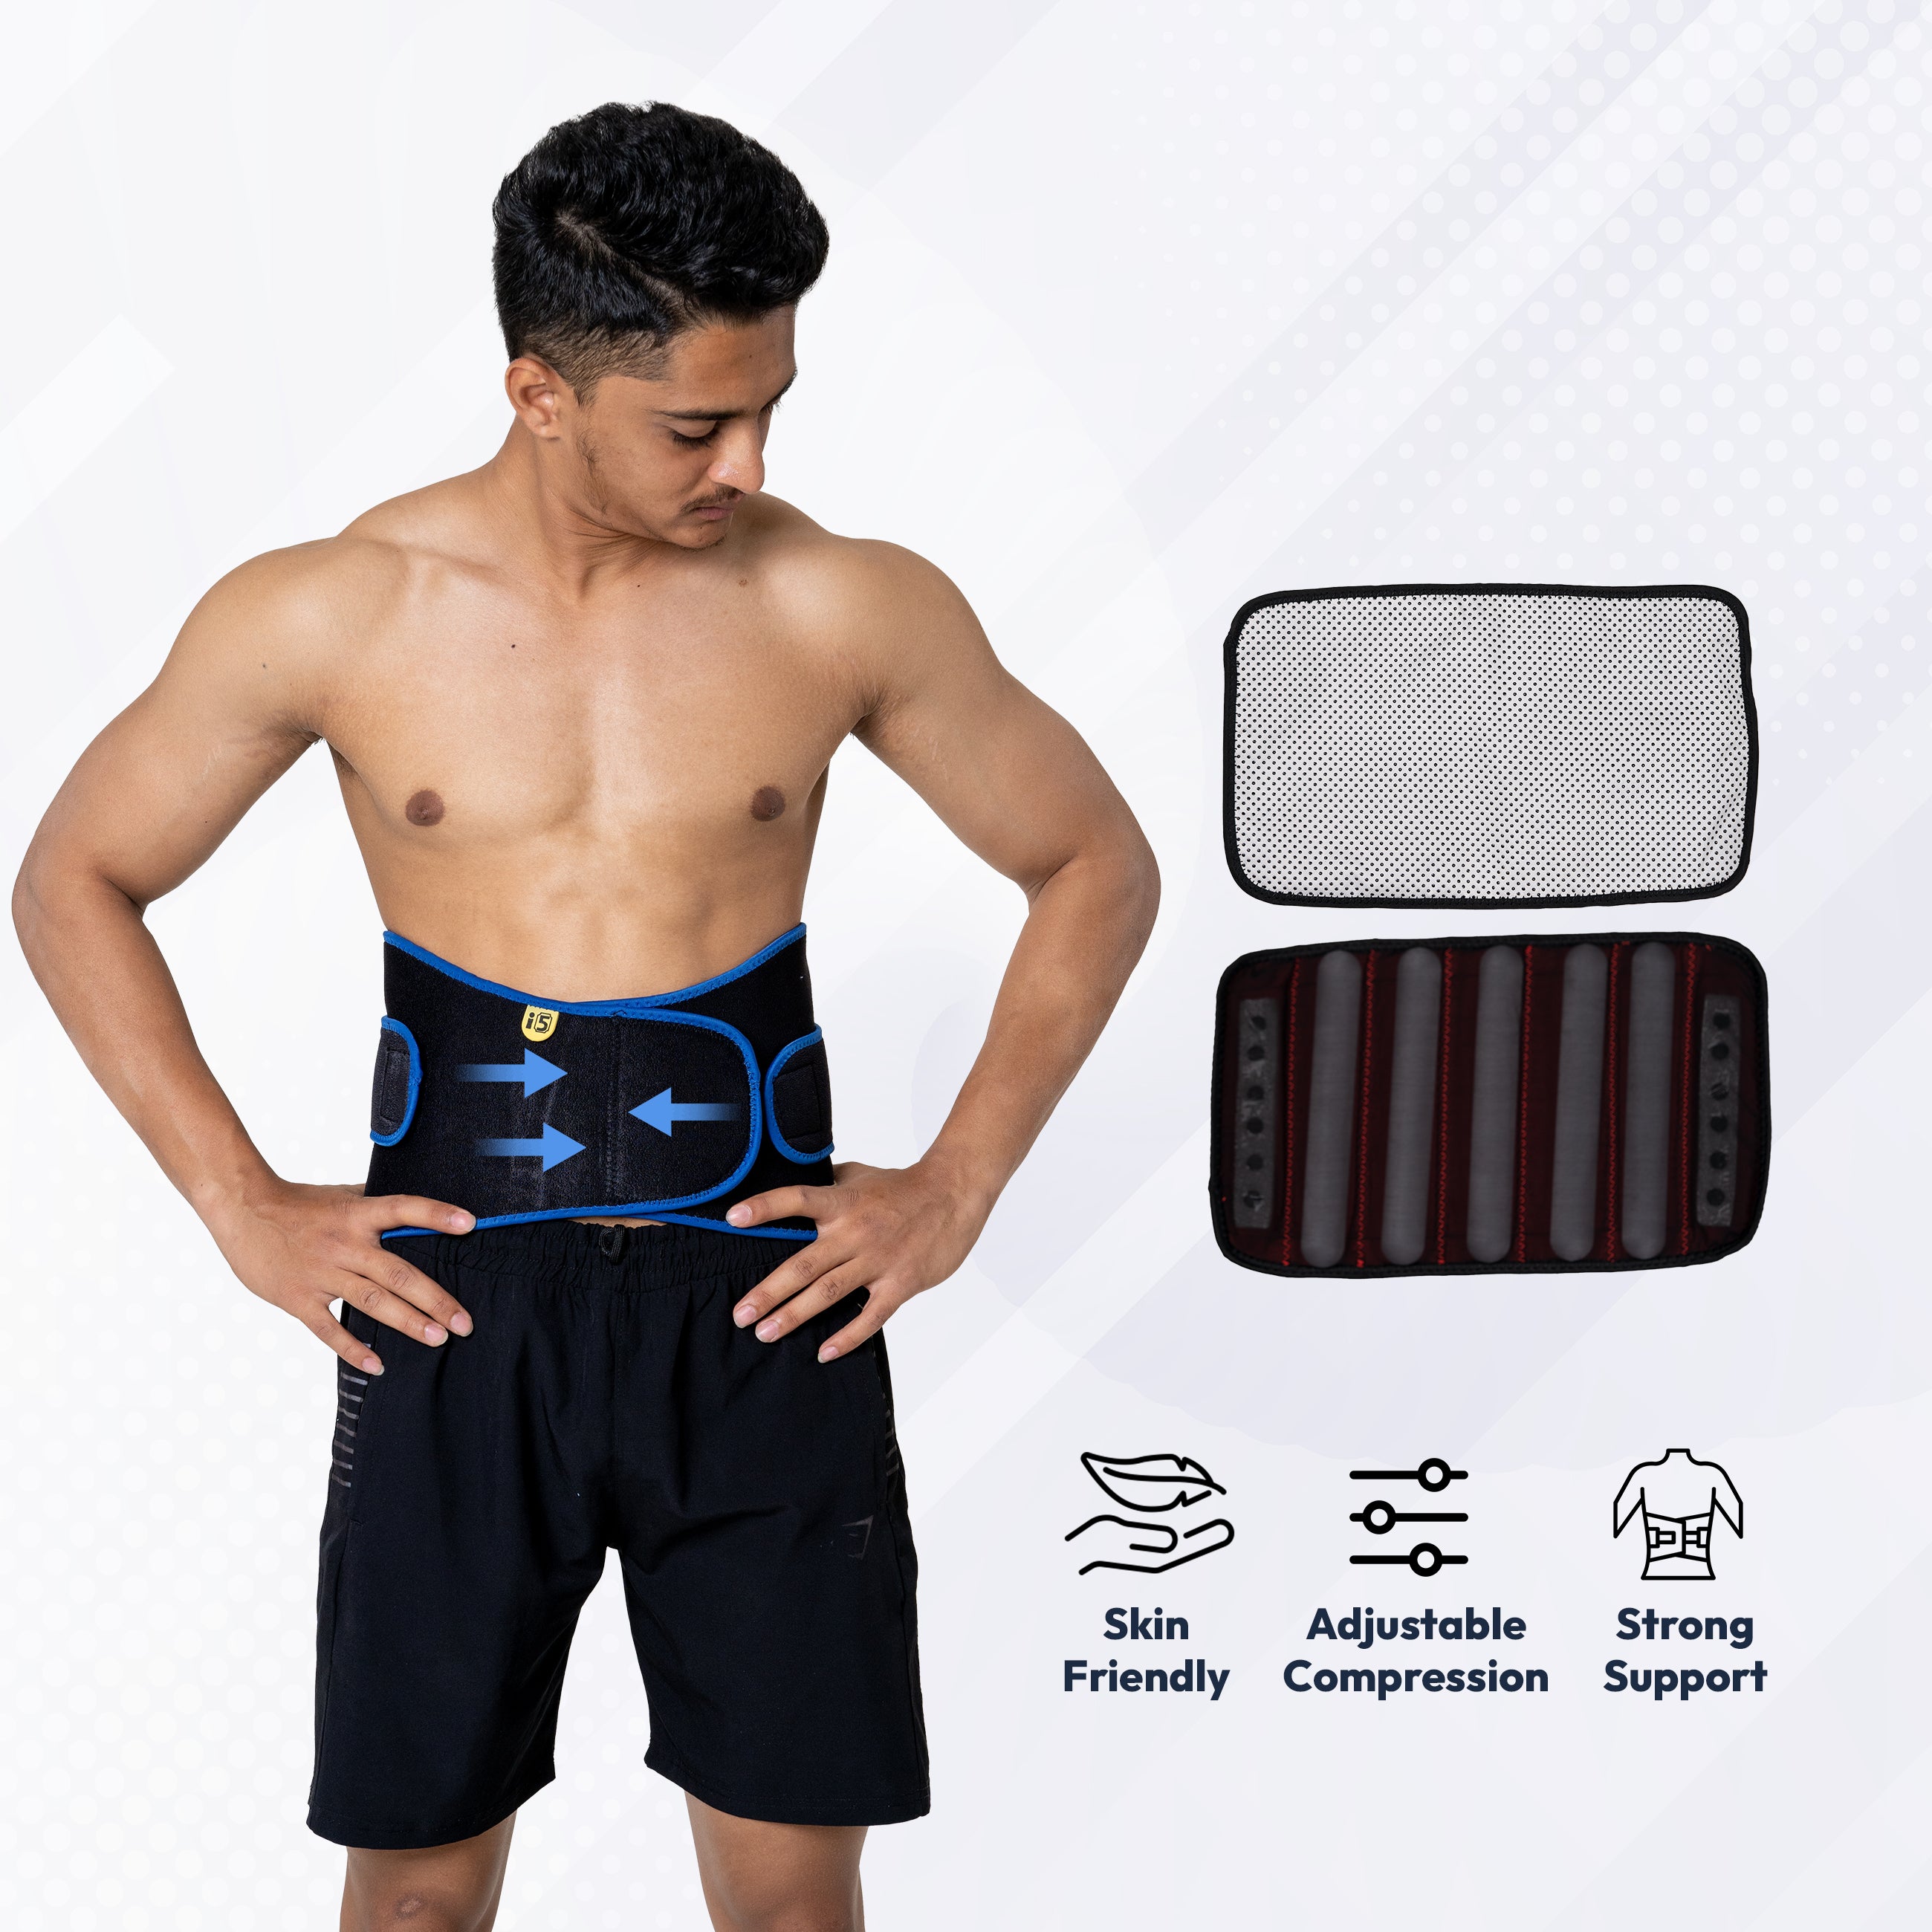 I5Joints-Far Infrared  Back Support(Comfort Belt for Lower Back Pain Relief, for Better Posture and Pain Relief and Added Gel Padding for Comfort)